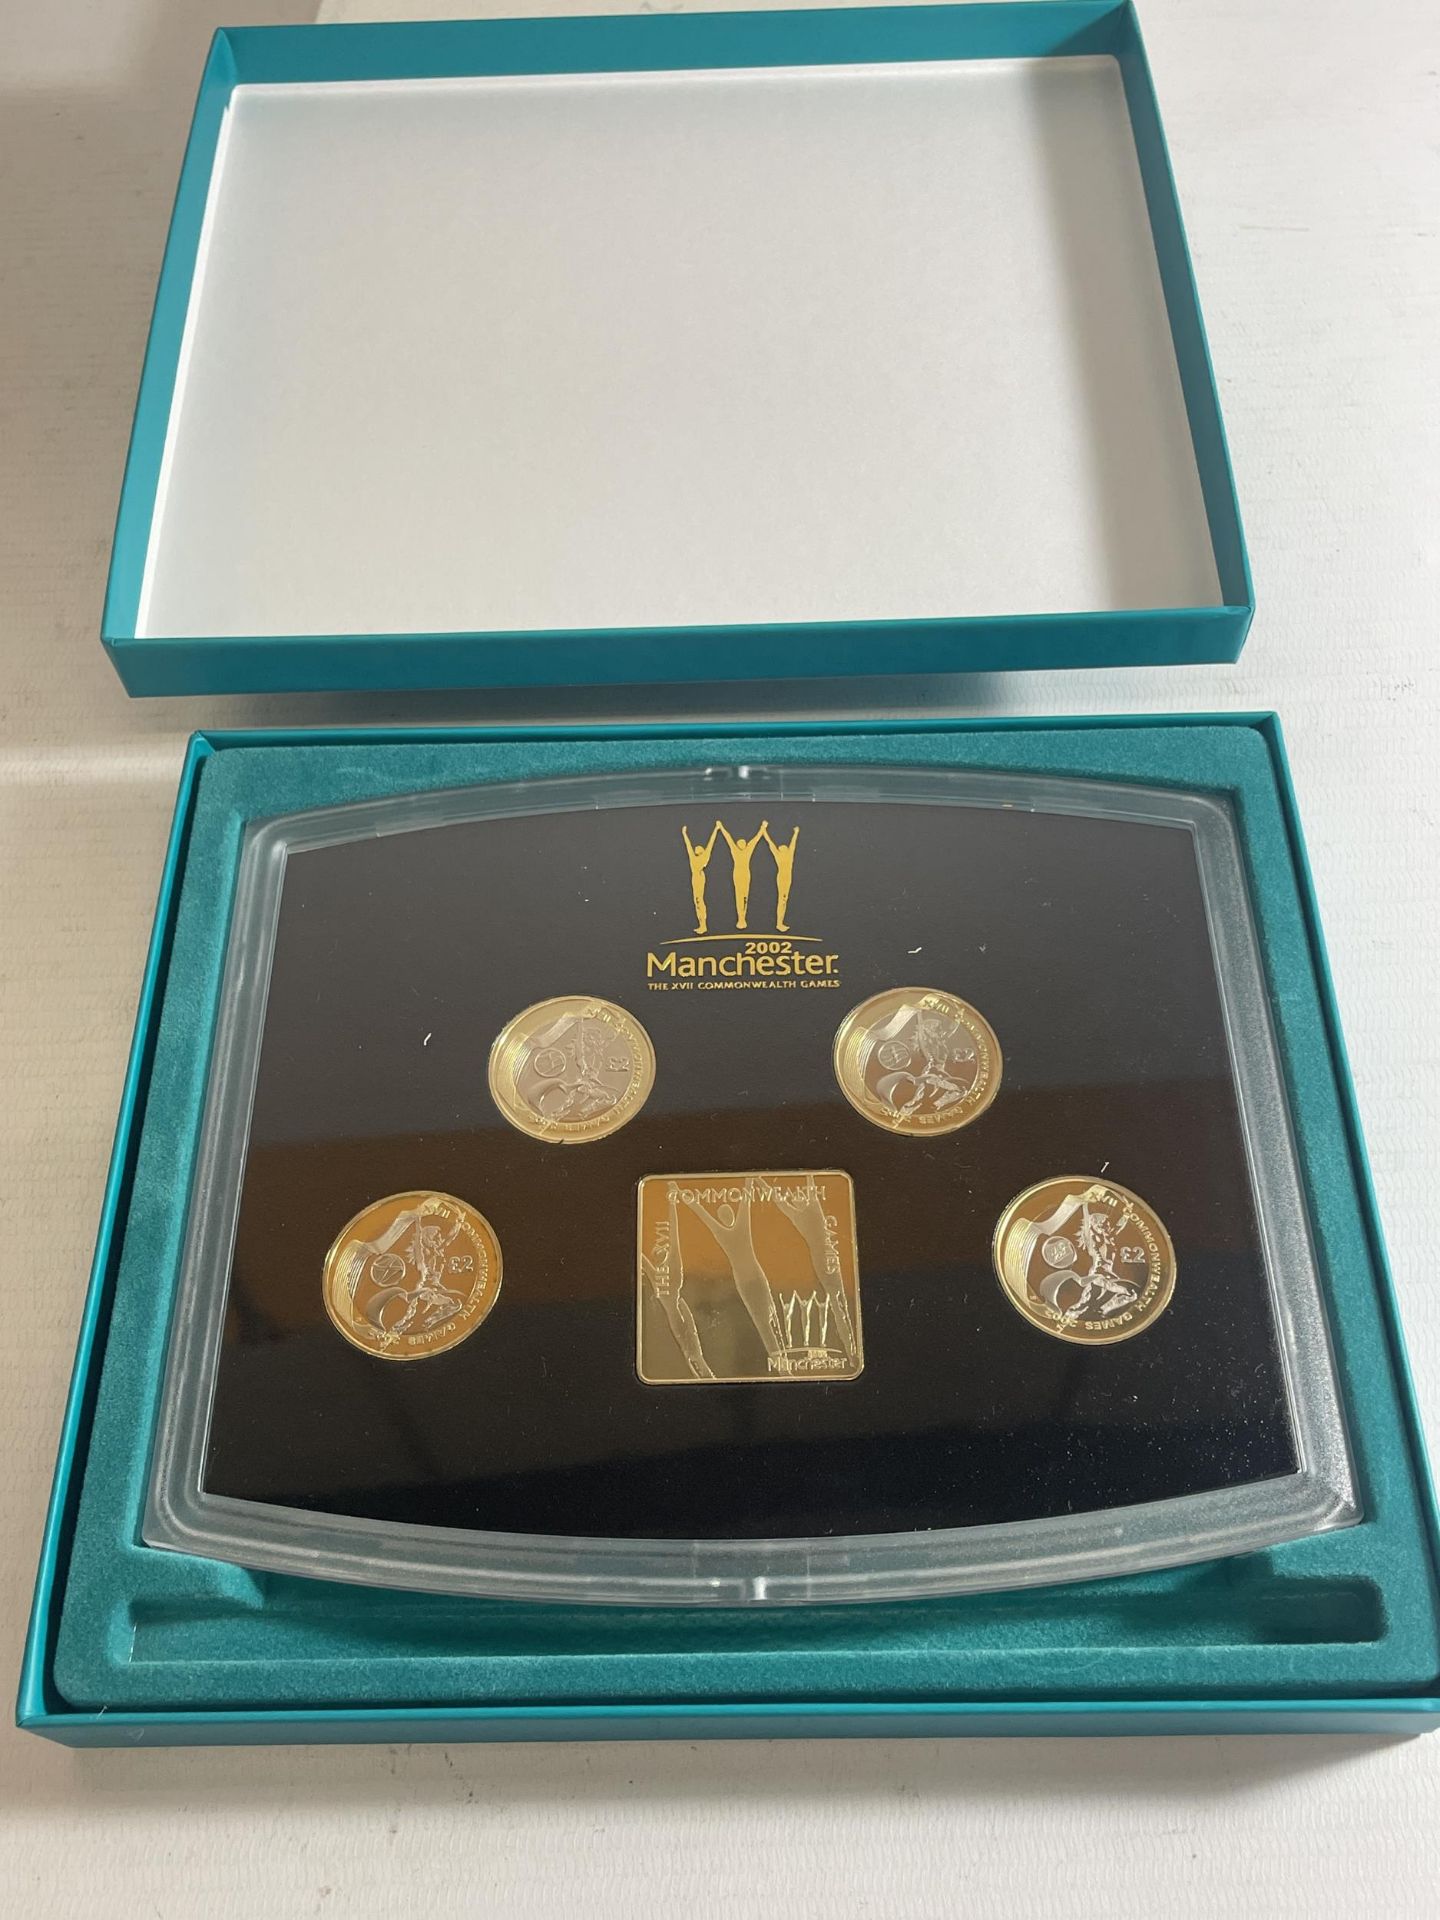 MANCHESTER 2002 , FOUR X £2 COIN SET , TO COMMEMORATE THE COMMONWEALTH GAMES . PRISTINE CONDITION .